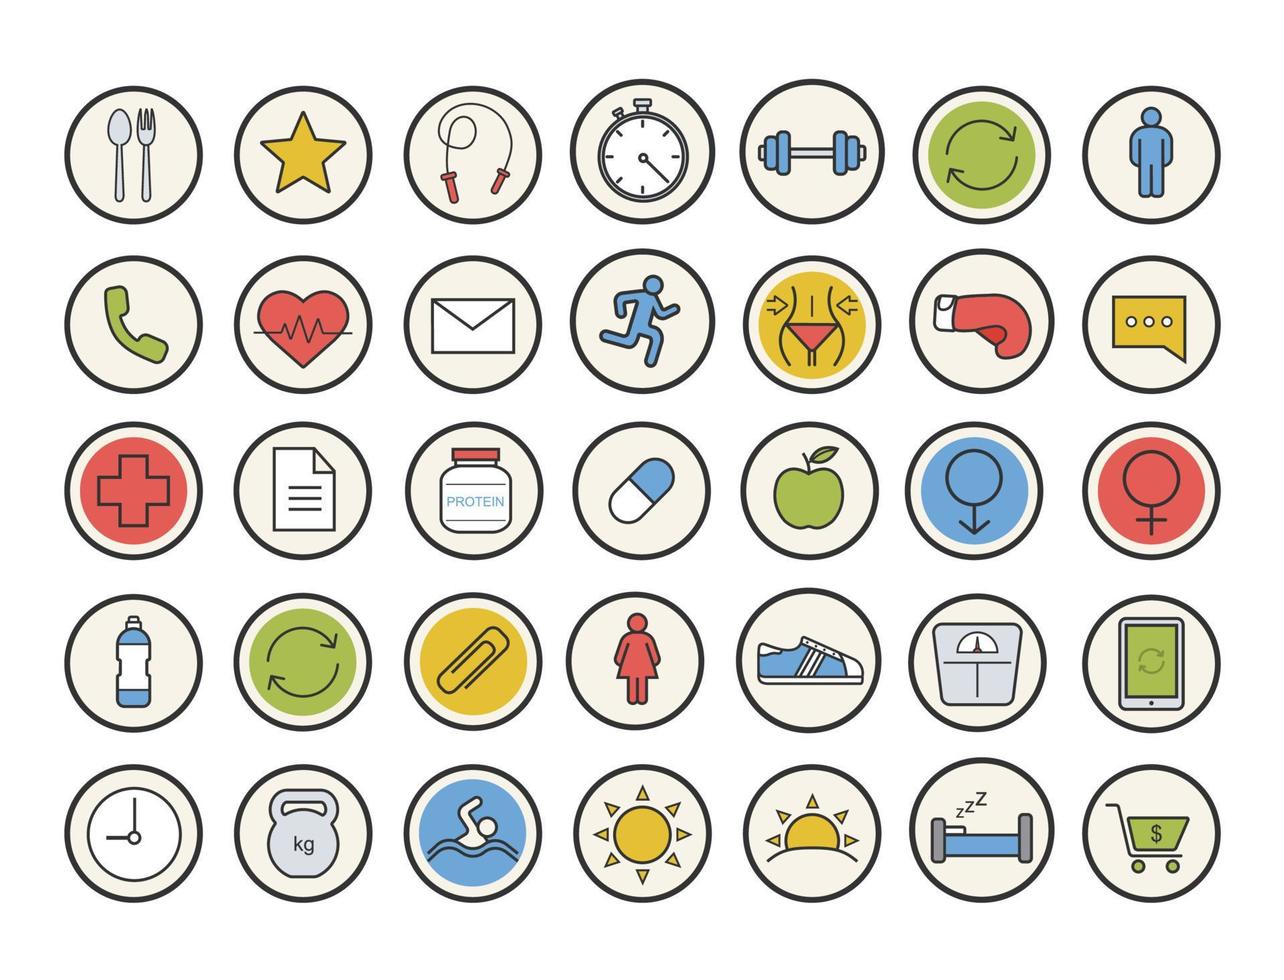 Sport and fitness color icons set. Healthy lifestyle. Gym training equipment. Daily timetable, healthcare, organizer, healthy diet and gender symbols. Vector isolated illustrations